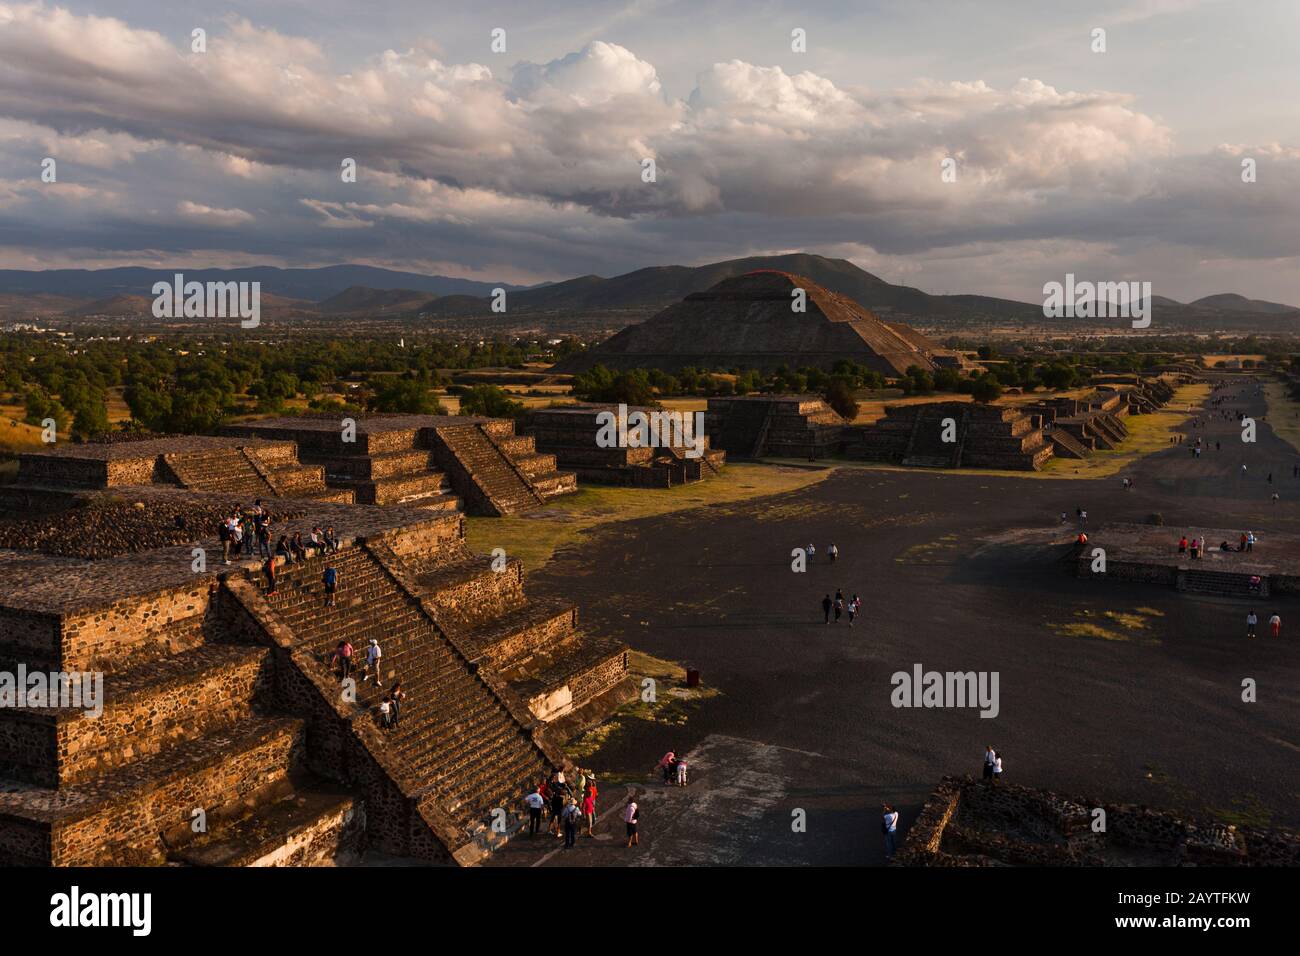 Avenue of the Dead and Pyramid of the Sun, from Moon Pyramid, at, evening, Teotihuacan, suburb of Mexico City, Mexico, Central America Stock Photo